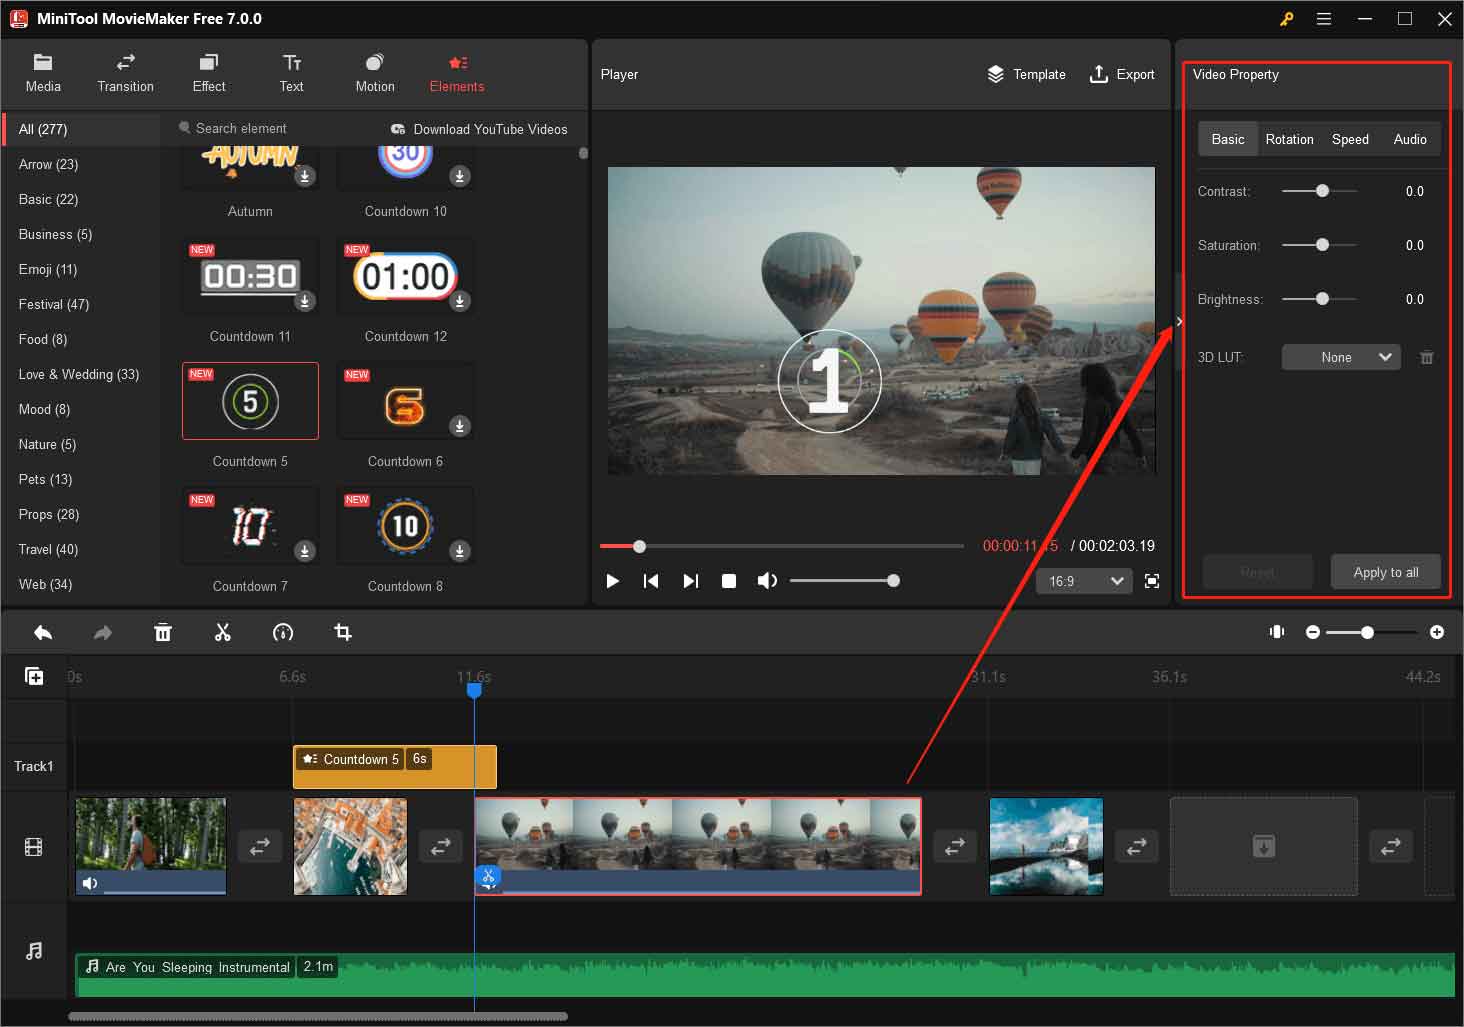 edit video in Video Property in MiniTool MovieMaker